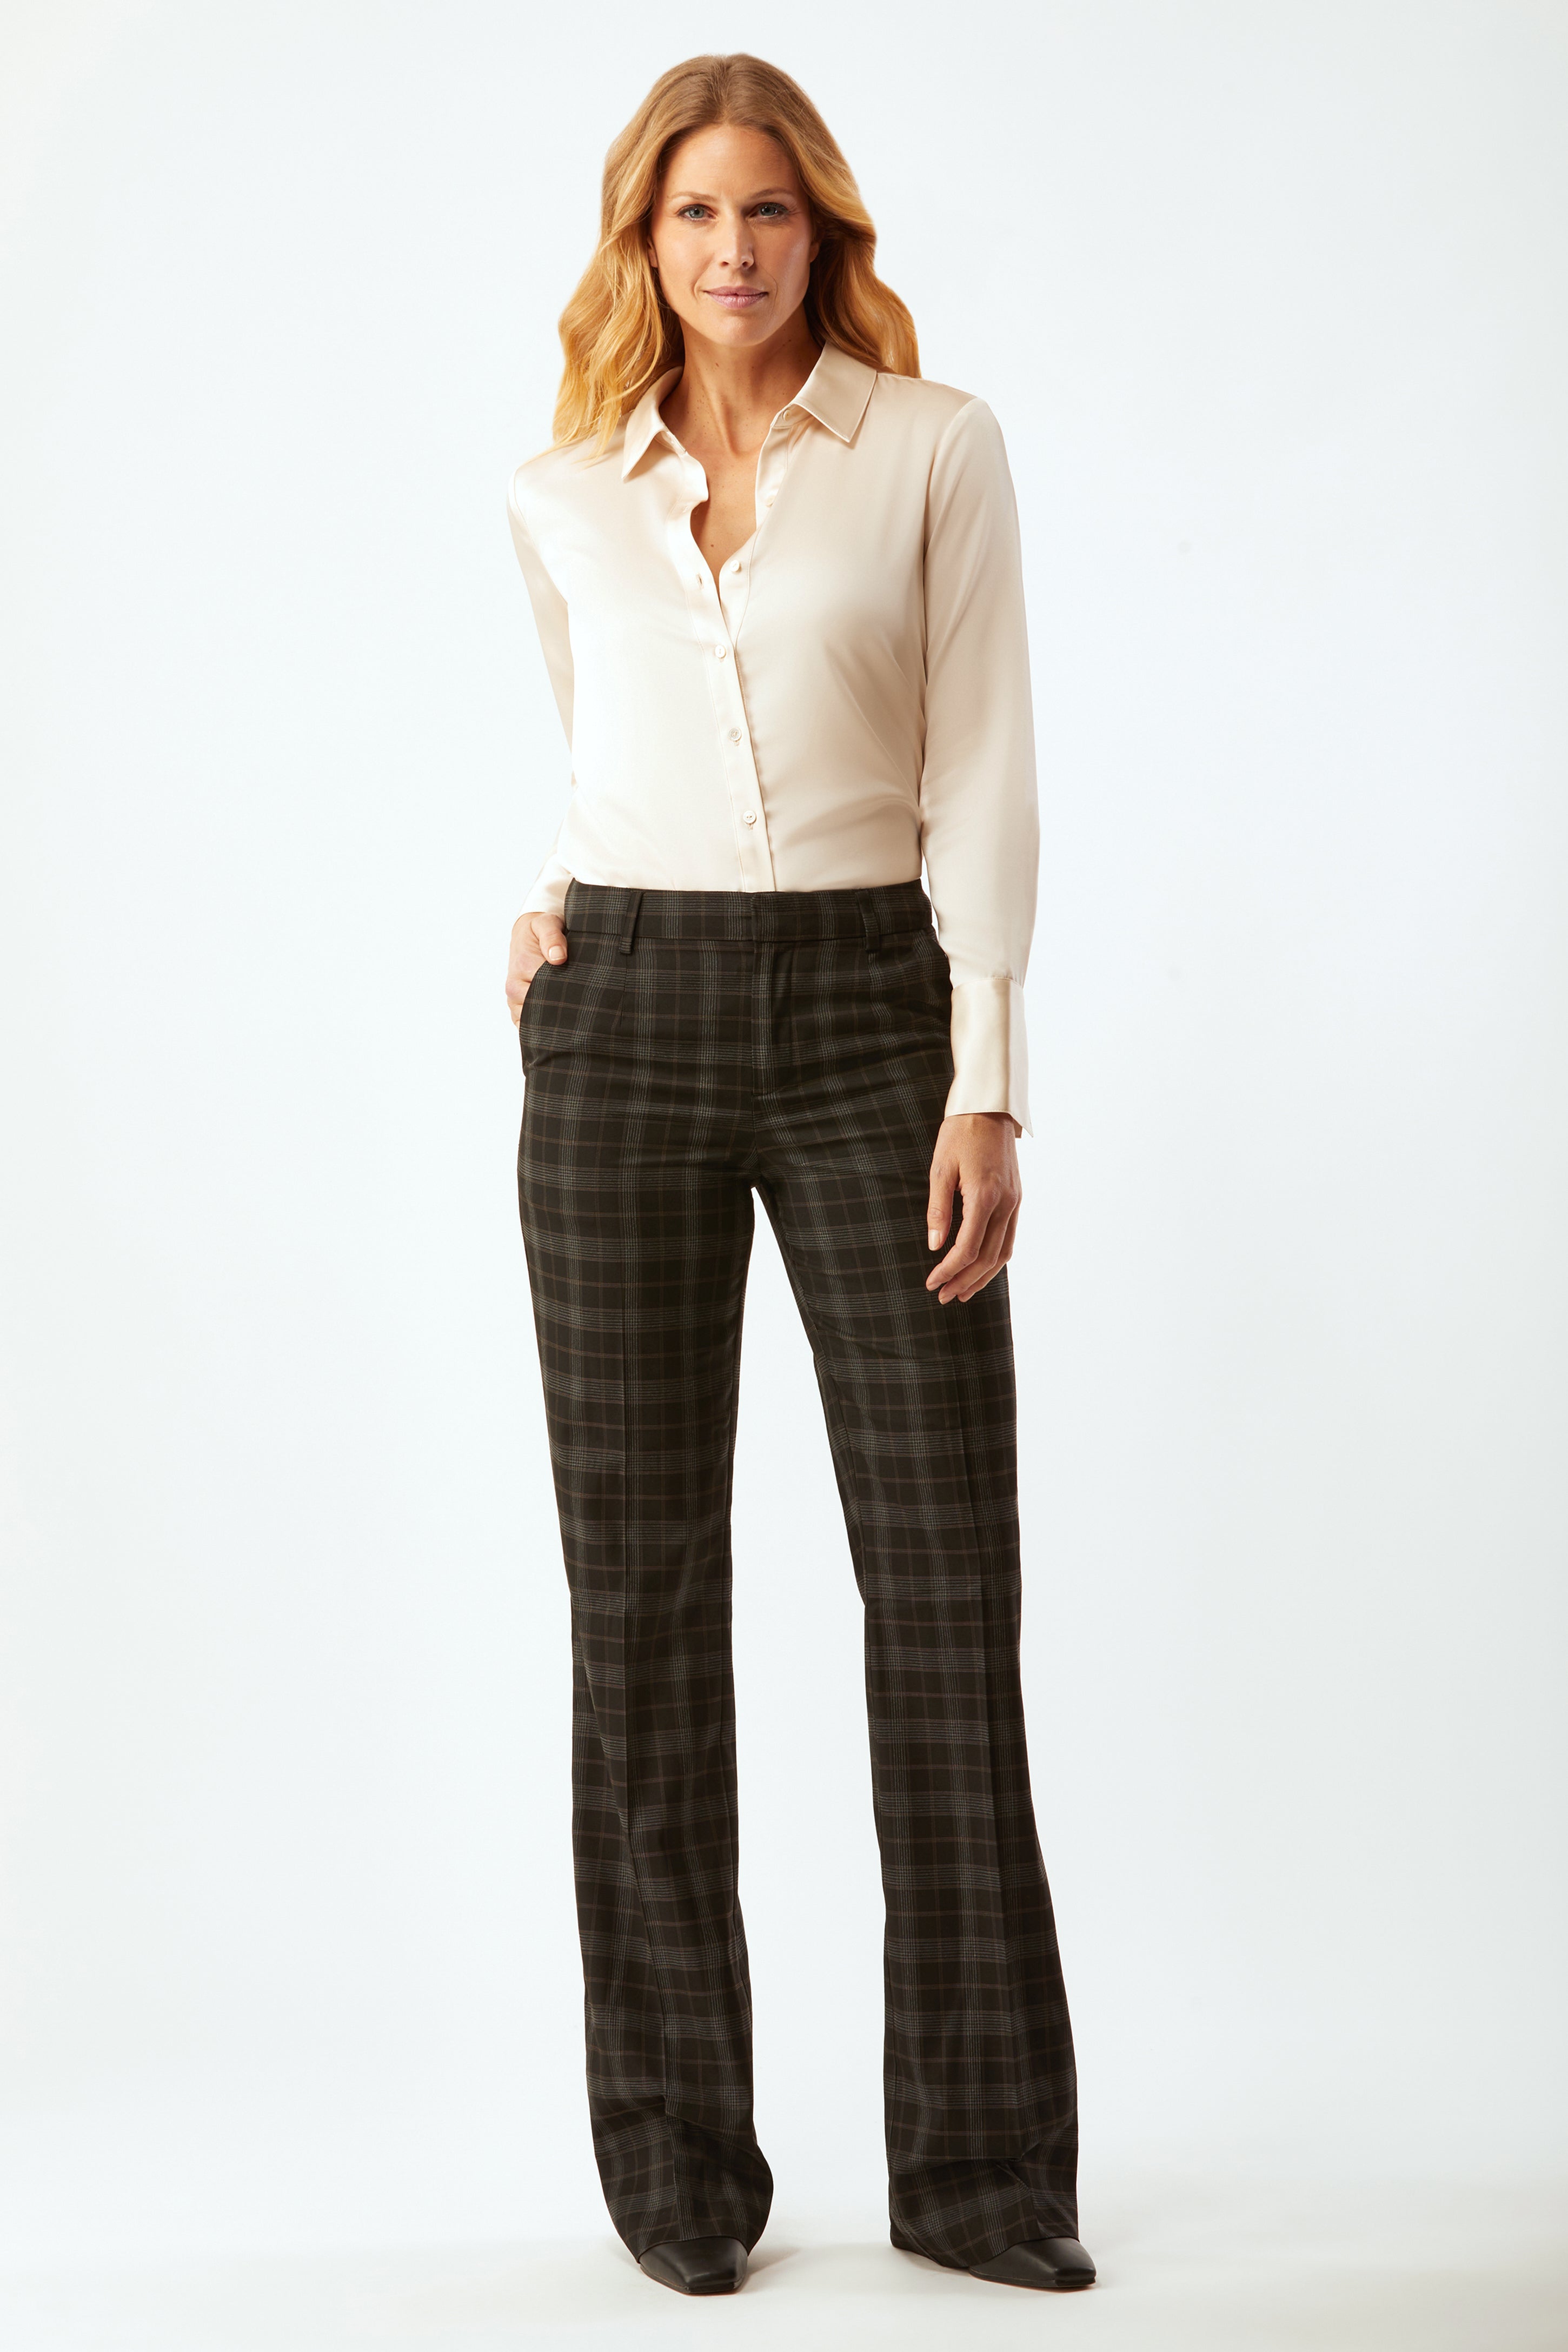 Buy ANINE BING Carrie High-rise Plaid Pants - Grey Plaid At 70% Off |  Editorialist